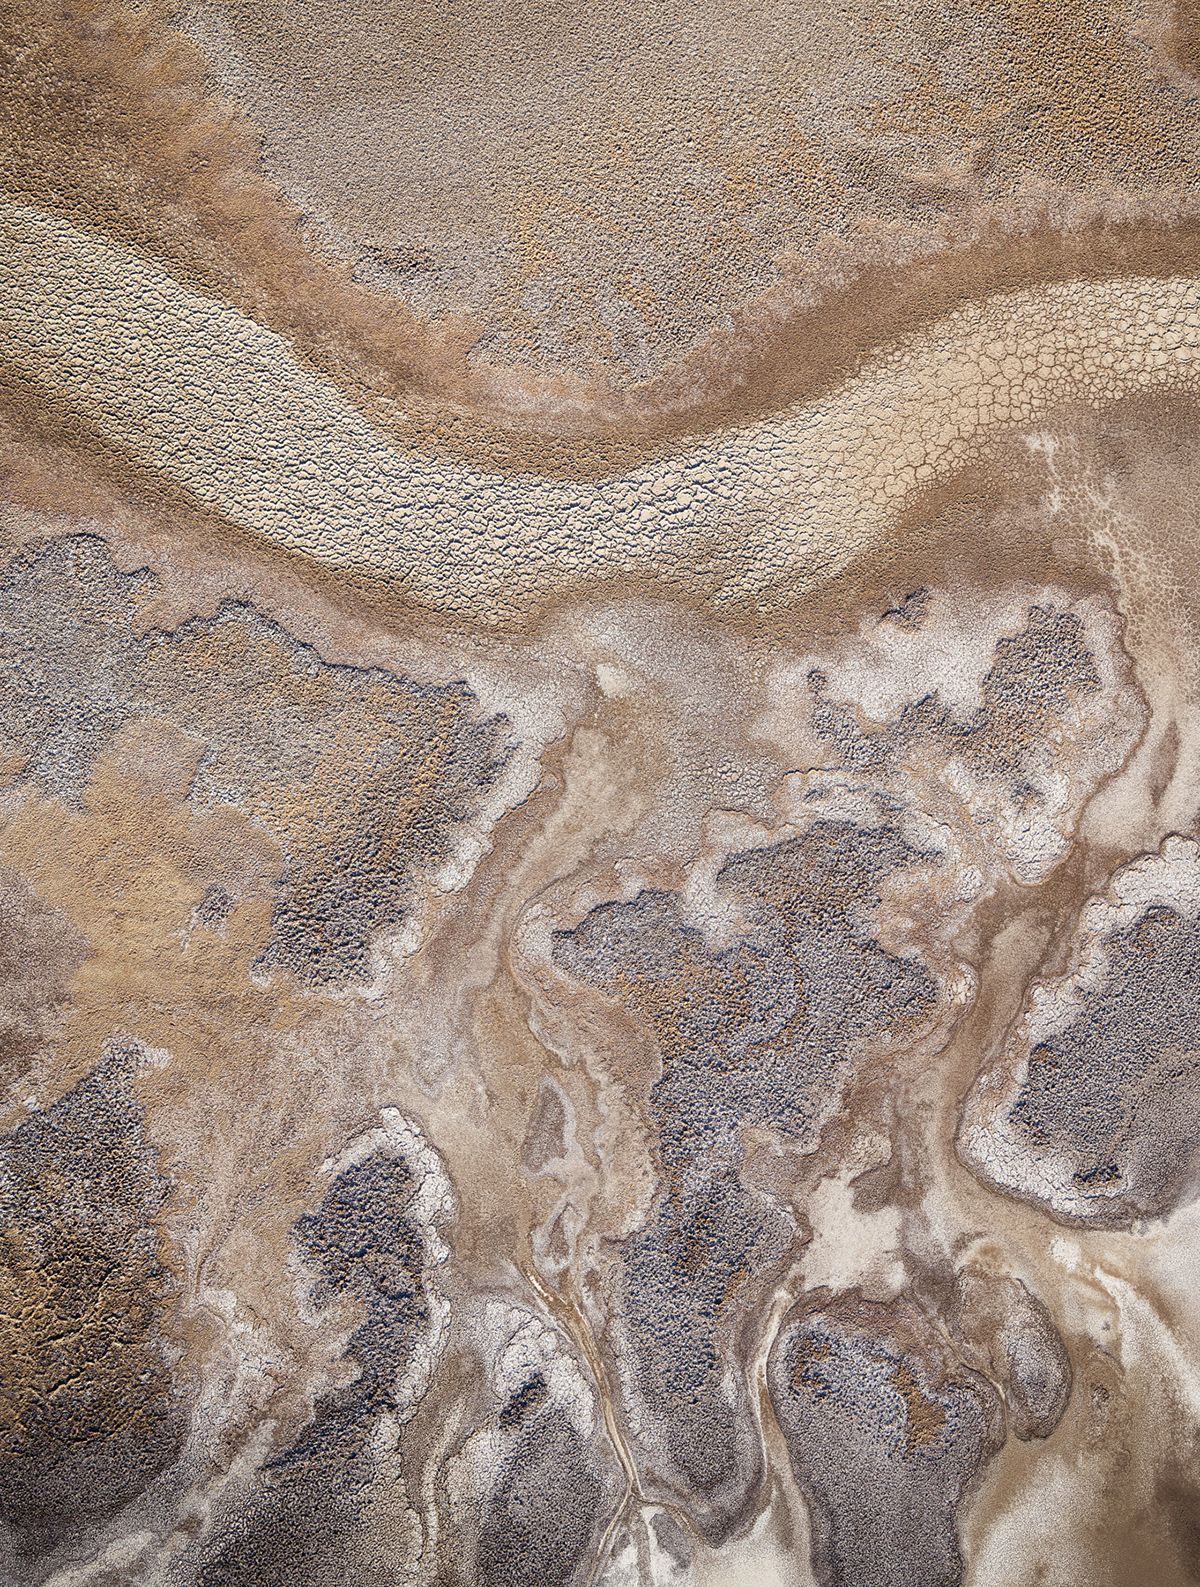 National Park Landscape Travel mountains Aerial Photography scenic fine art California Photography  Death Valley